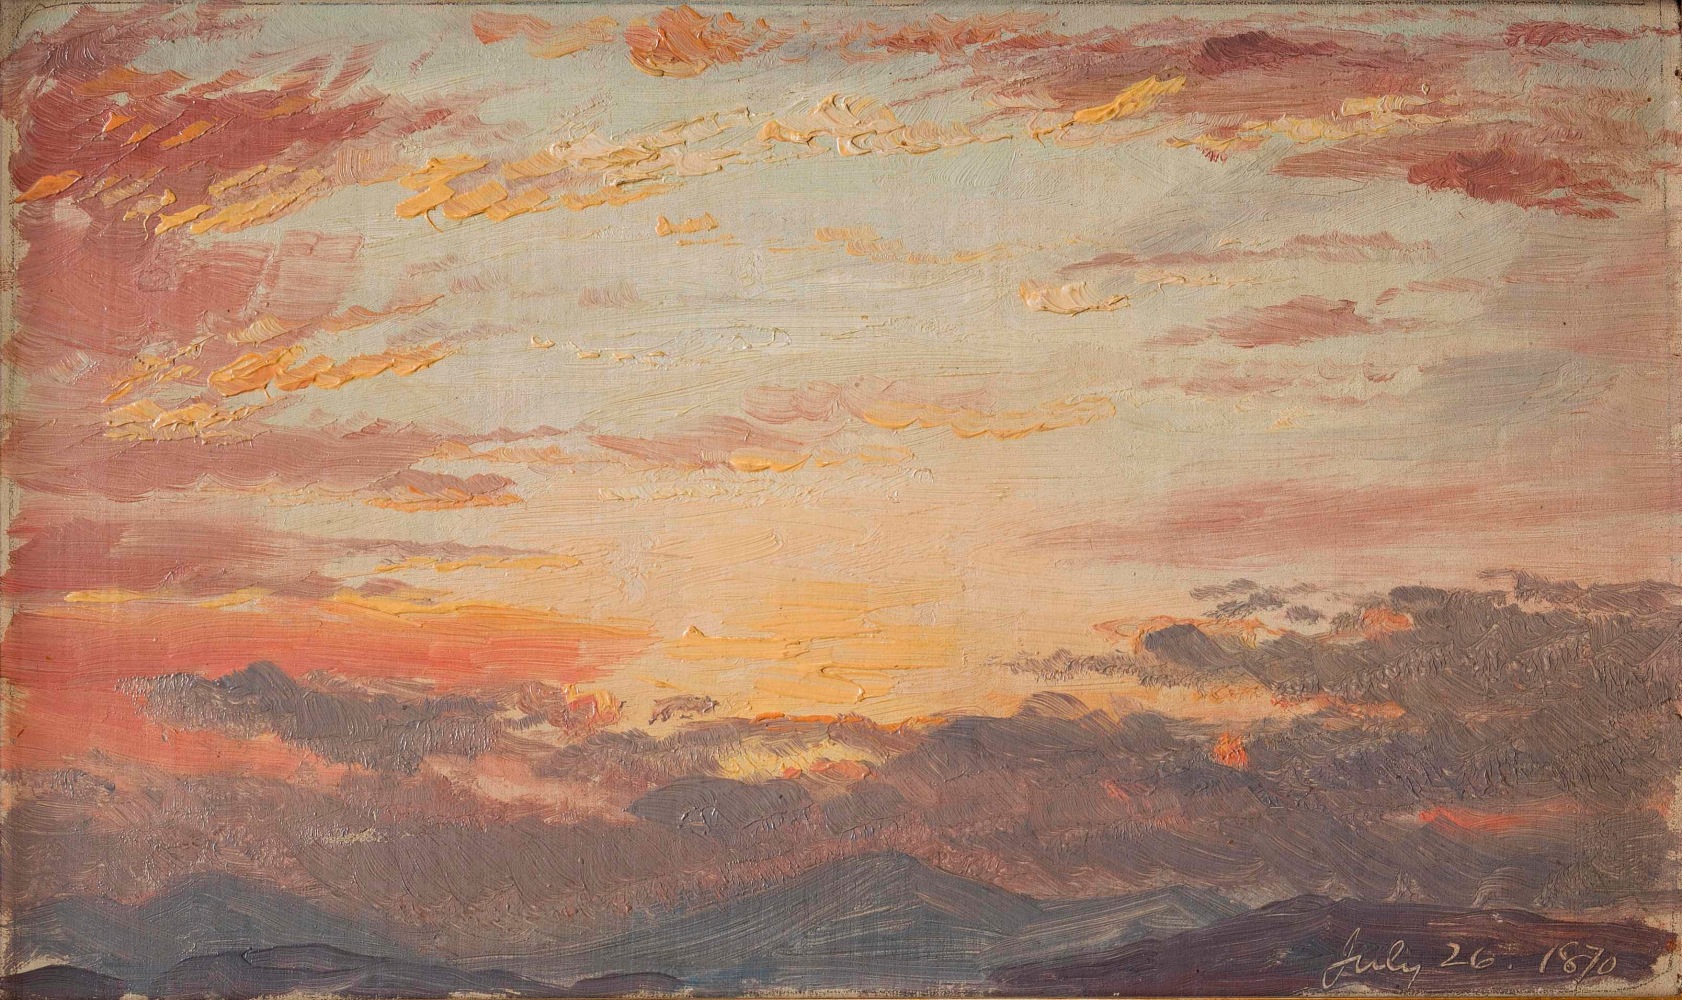 Frederic Edwin Church&amp;nbsp;

Sunset on July 26, 1870

1870

oil on paper mounted on artist&amp;#39;s board&amp;nbsp;

8 1/4 x 13 inches (21 x 33 inches)&amp;nbsp;